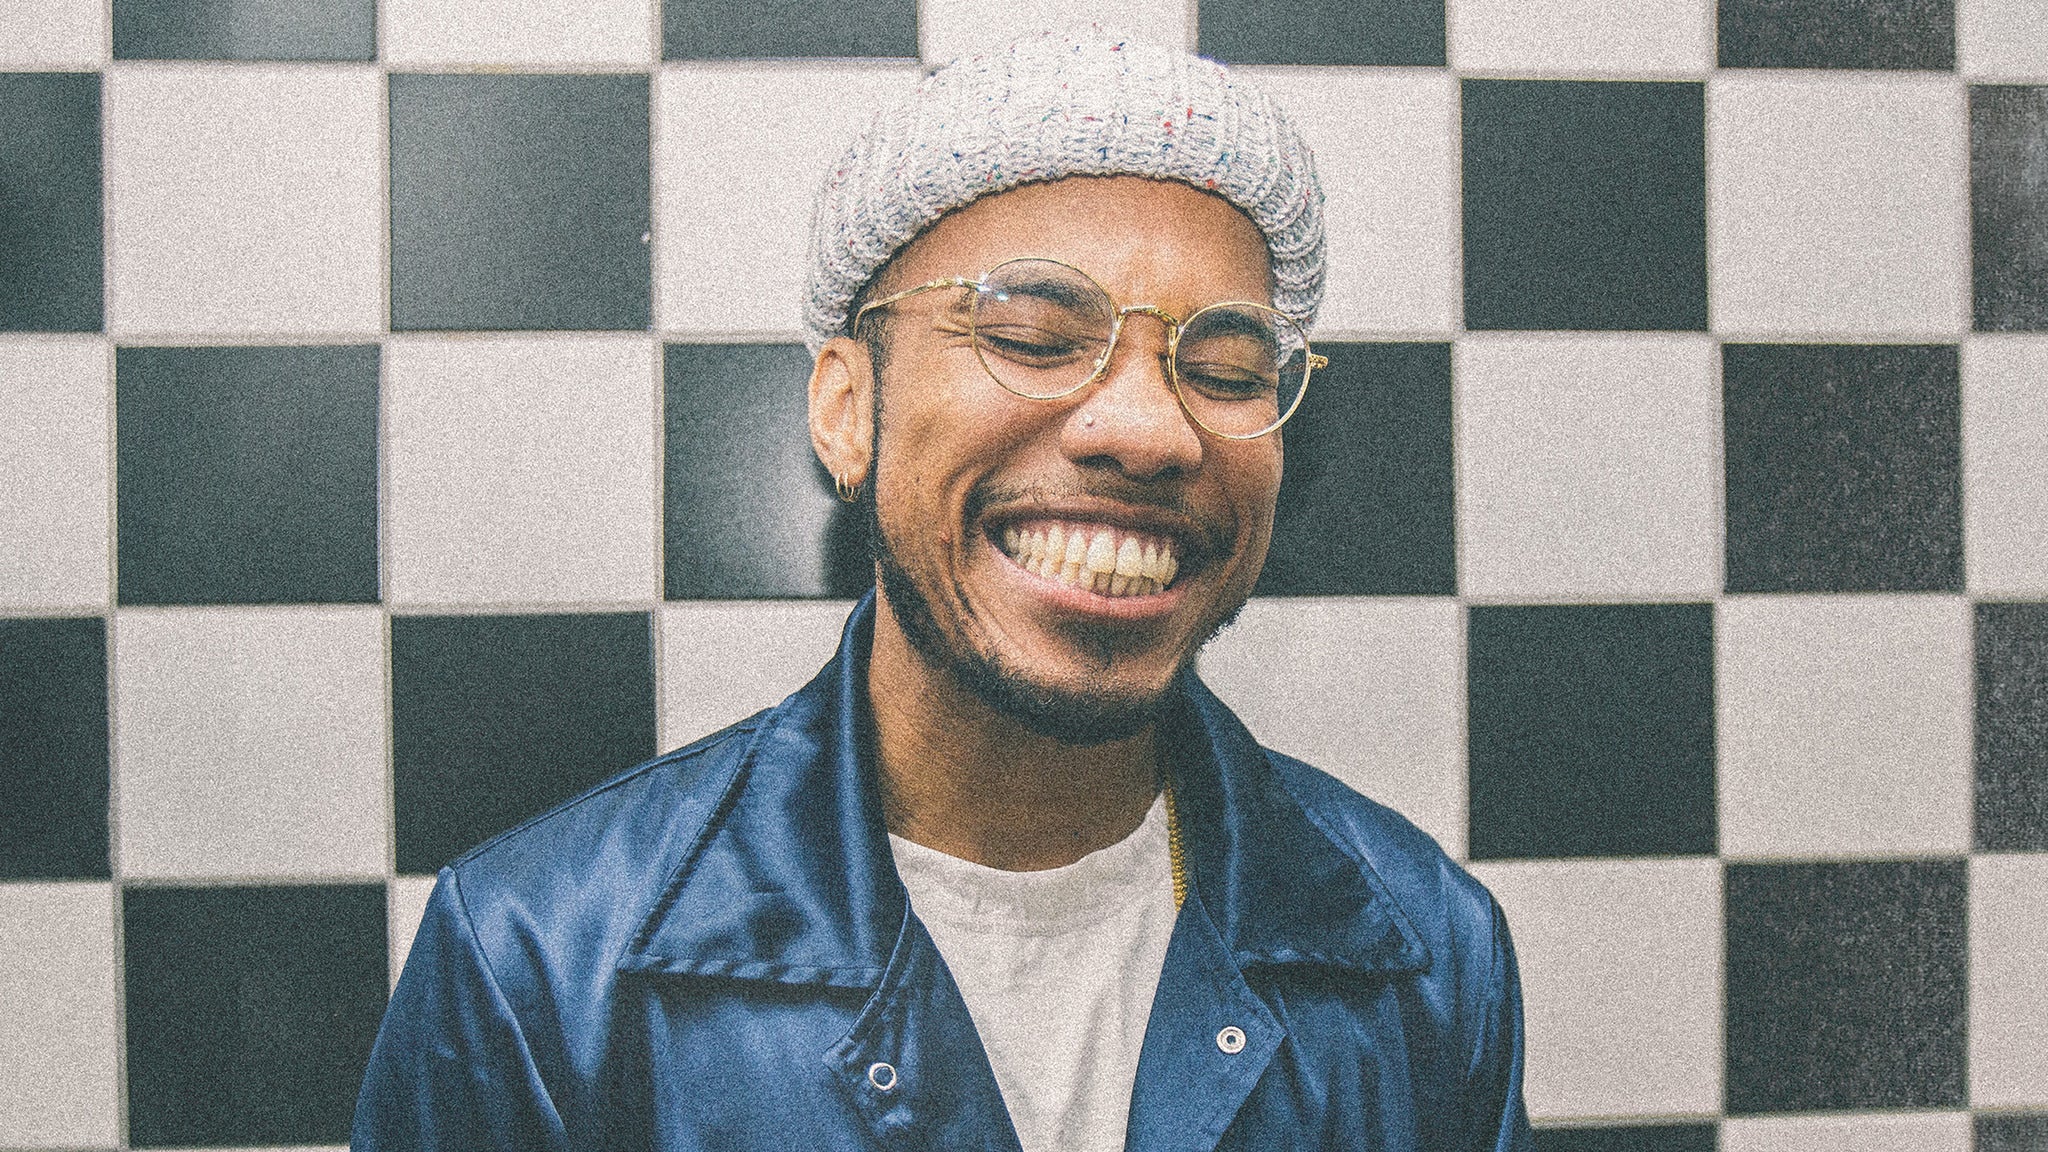 Anderson .Paak & The Free Nationals in National Harbor  promo photo for Artist presale offer code